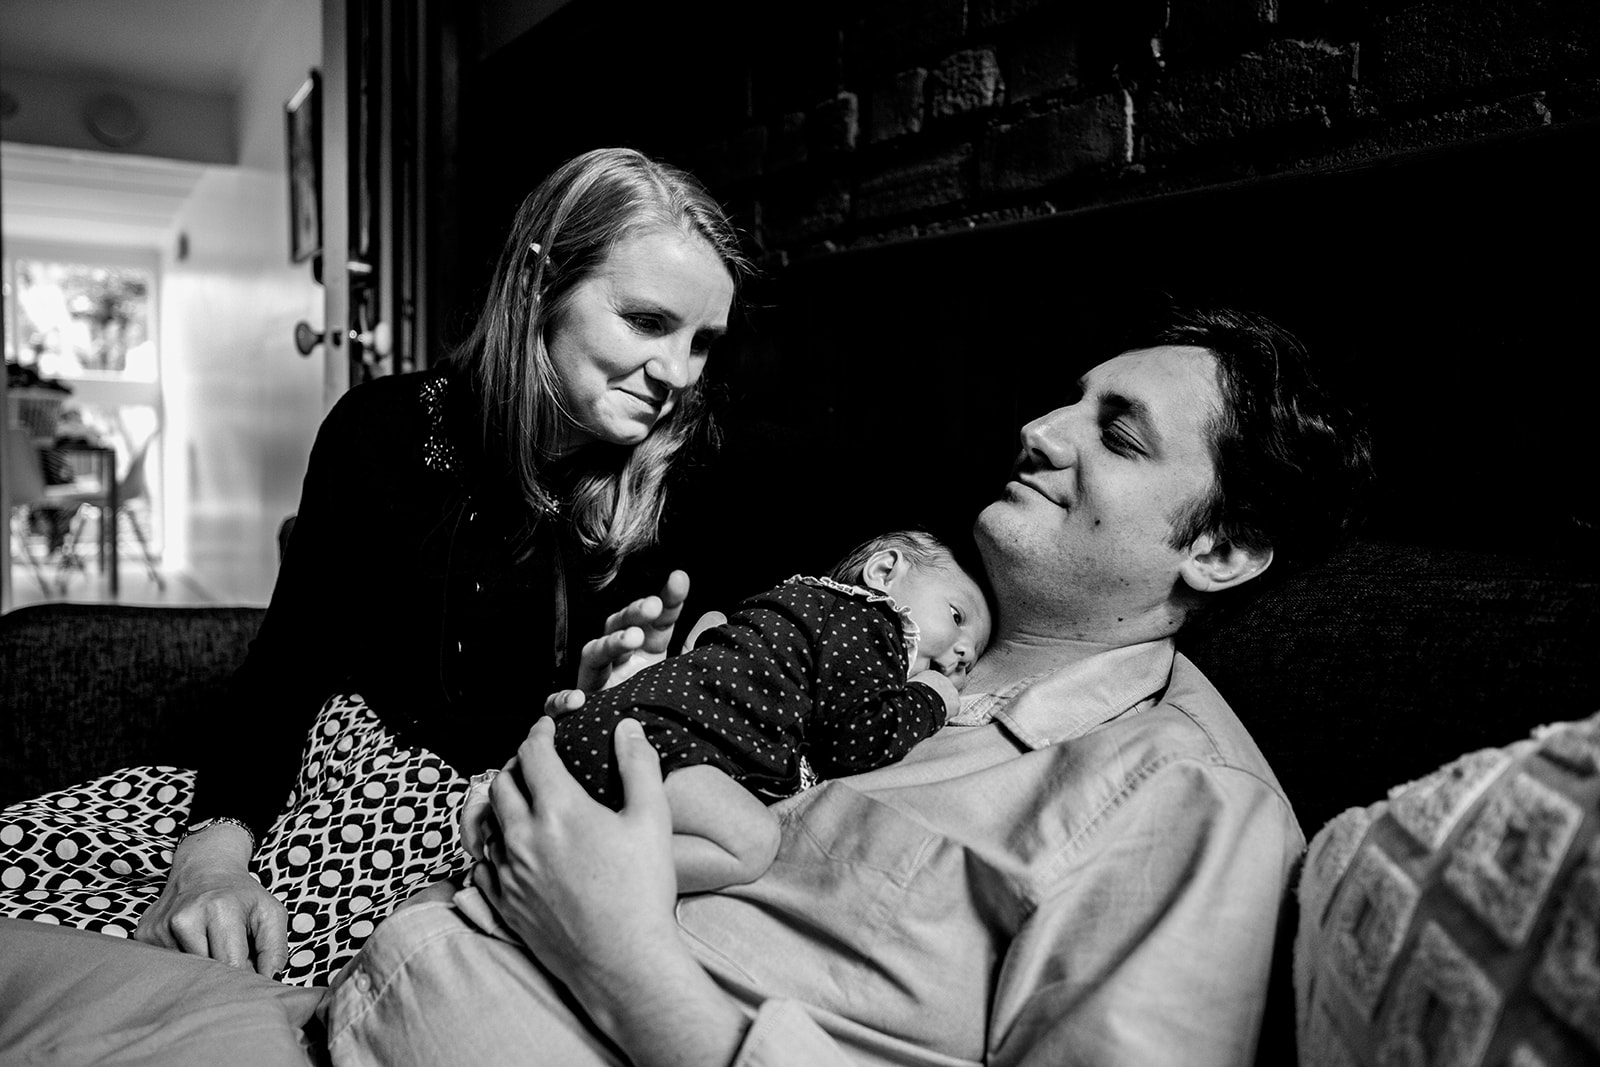 newborn baby laying of fathers chest during family portrait session